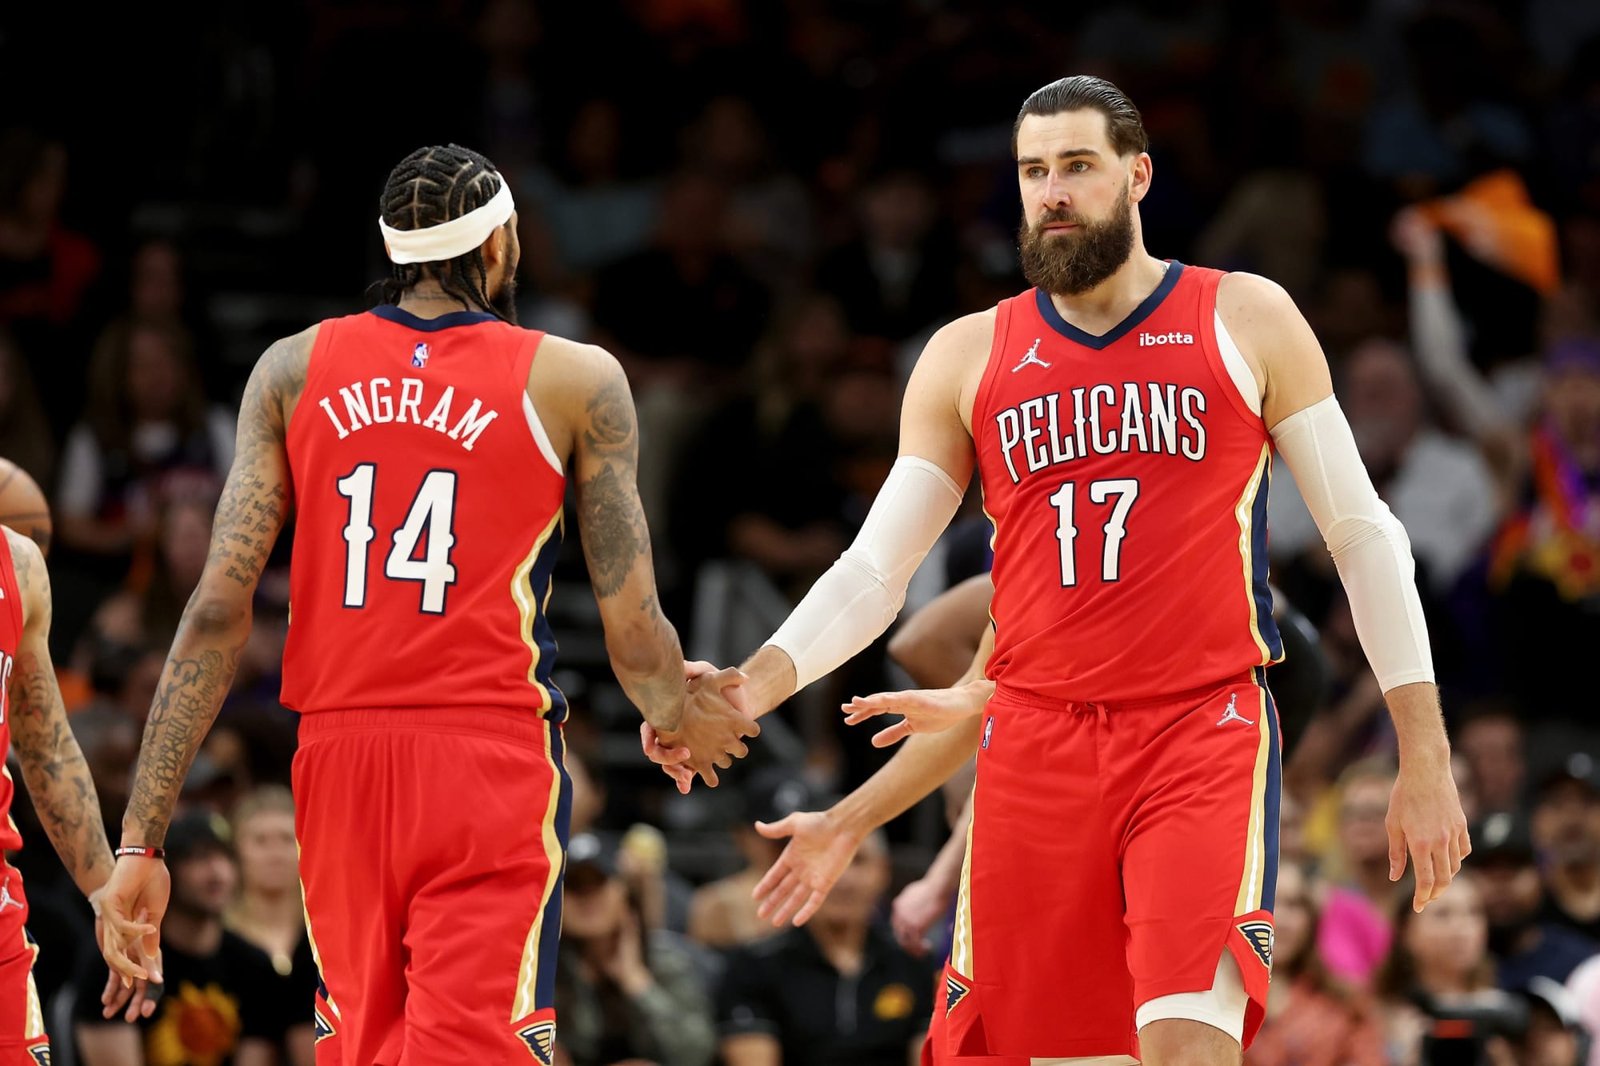 Pelicans vs. Suns: TV channel, live stream, prediction, odds and radio station for Game 3